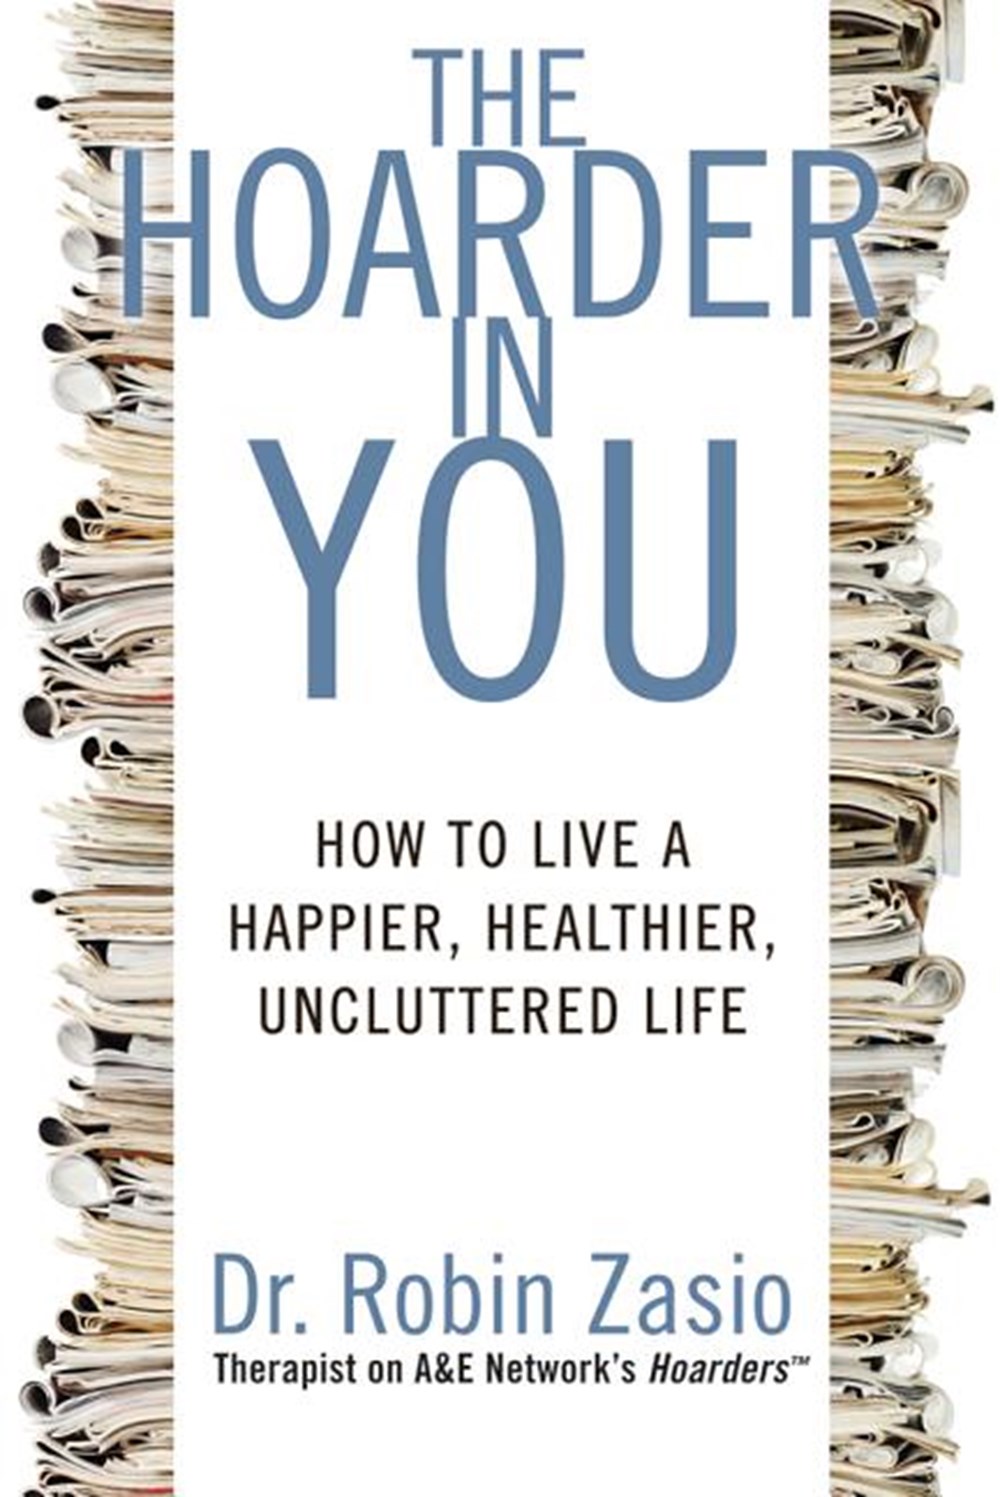 Hoarder in You: How to Live a Happier, Healthier, Uncluttered Life